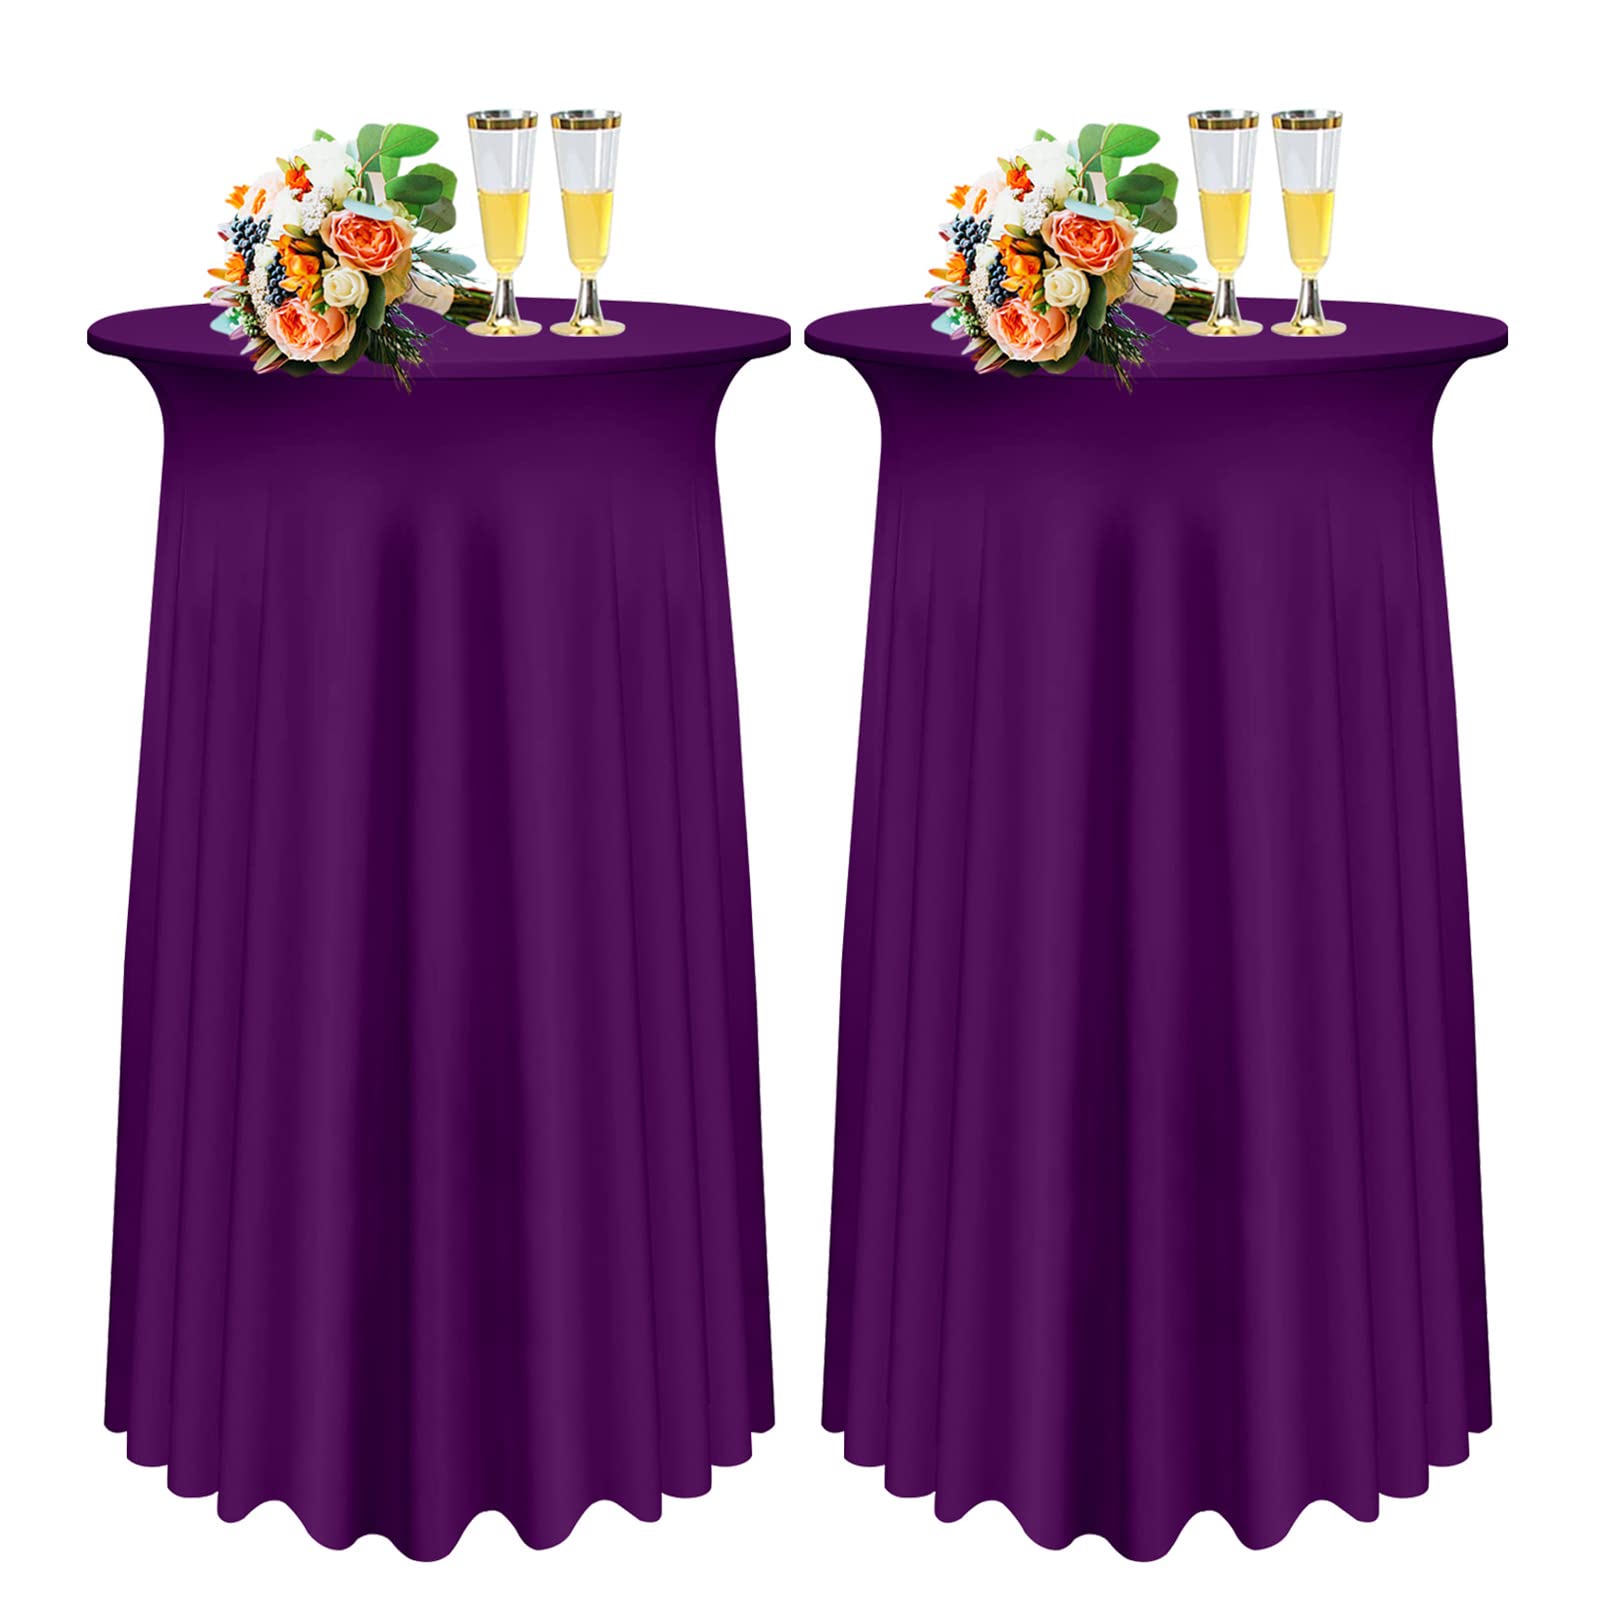 SHUOJIA 1/2/4 Packs Round Cocktail Table Skirt, Spandex Stretch Round Tablecloth Covers with Wavy Drapes, Fitted High Top Cocktail Table Skirt Table Dress for Party Wedding (2Pcs-80cm,Deep Purple)